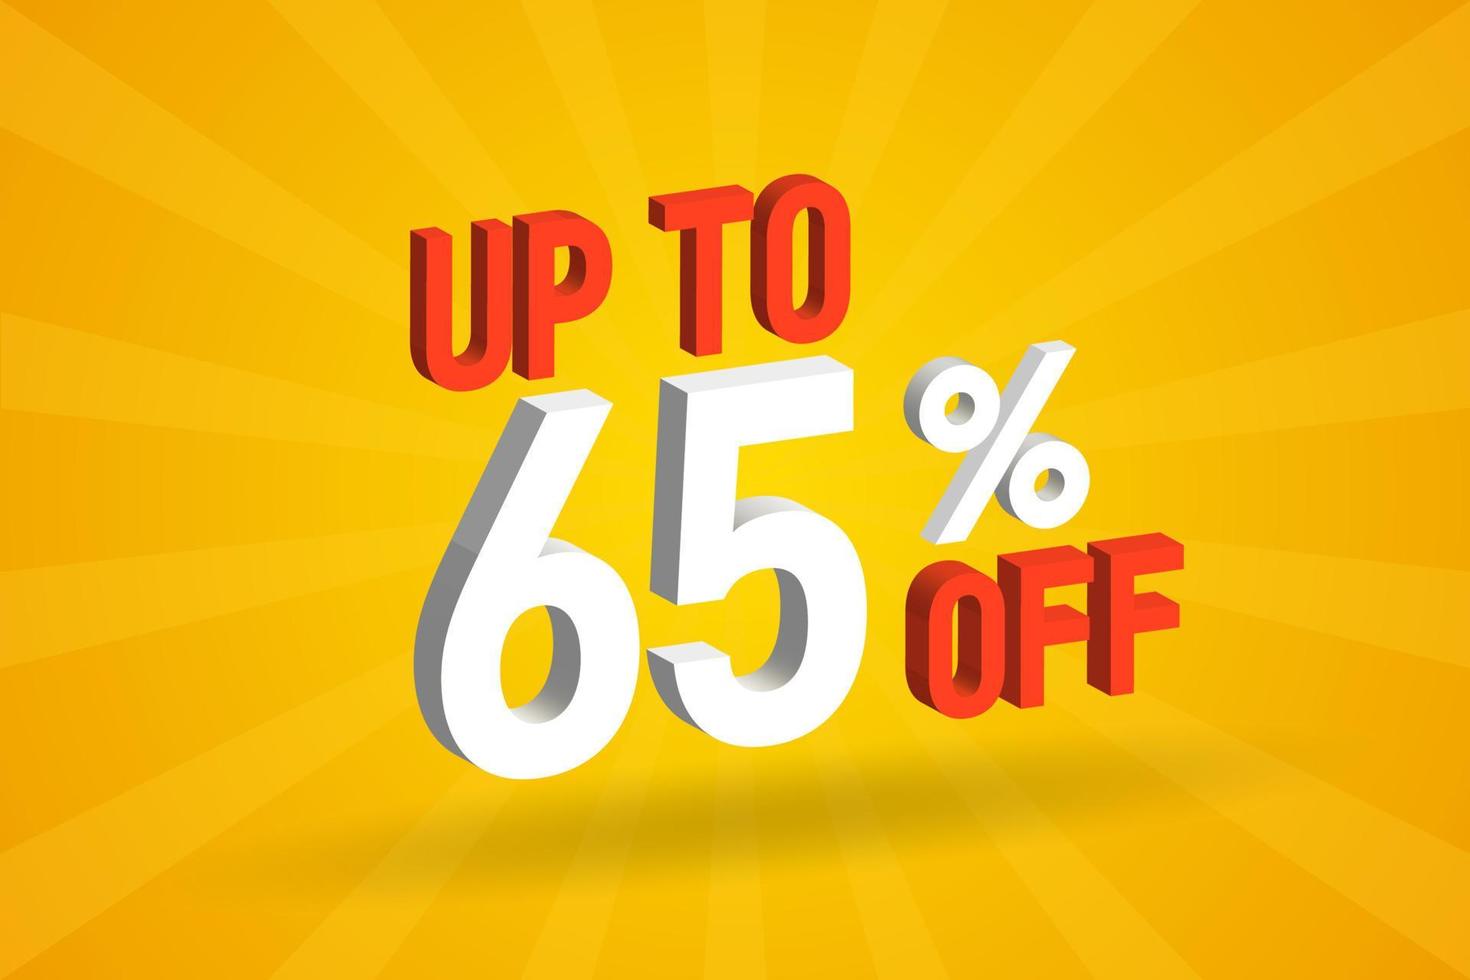 Up To 65 Percent off 3D Special promotional campaign design. Upto 65 of 3D Discount Offer for Sale and marketing. vector